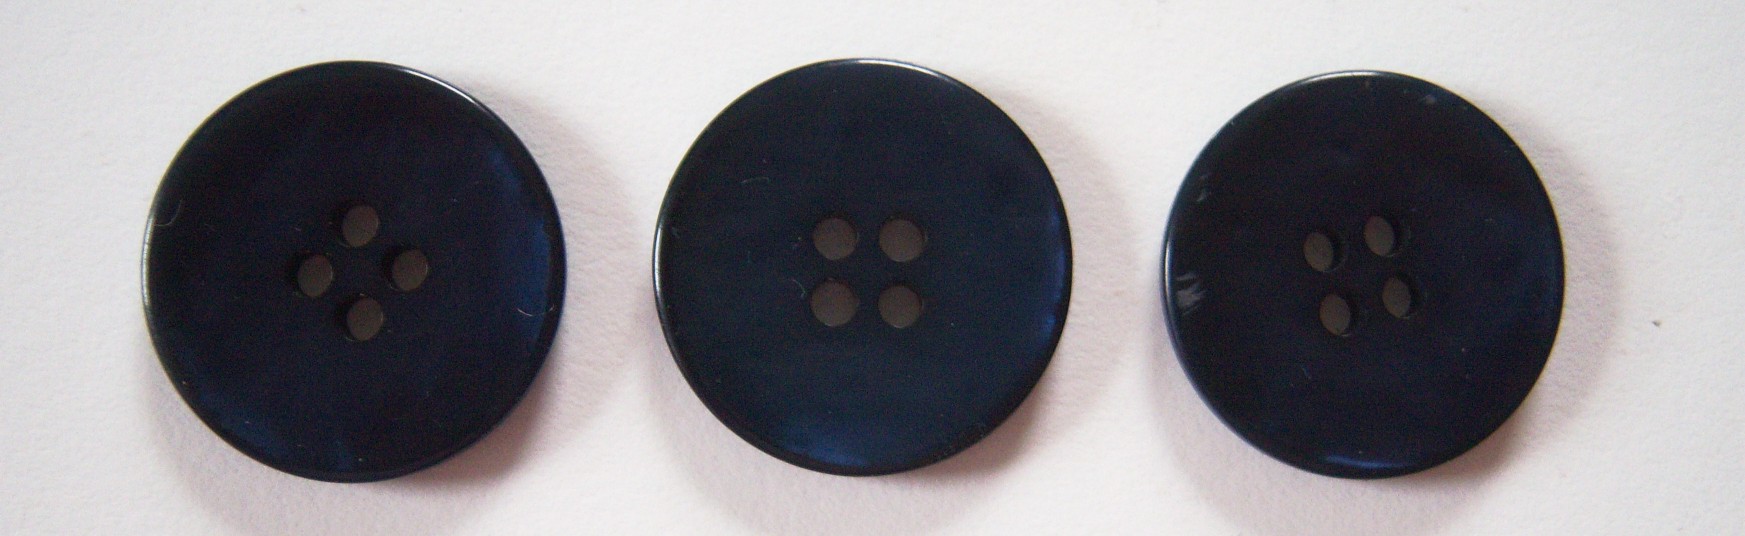 Navy Pearlized 7/8" 4 Hole Button